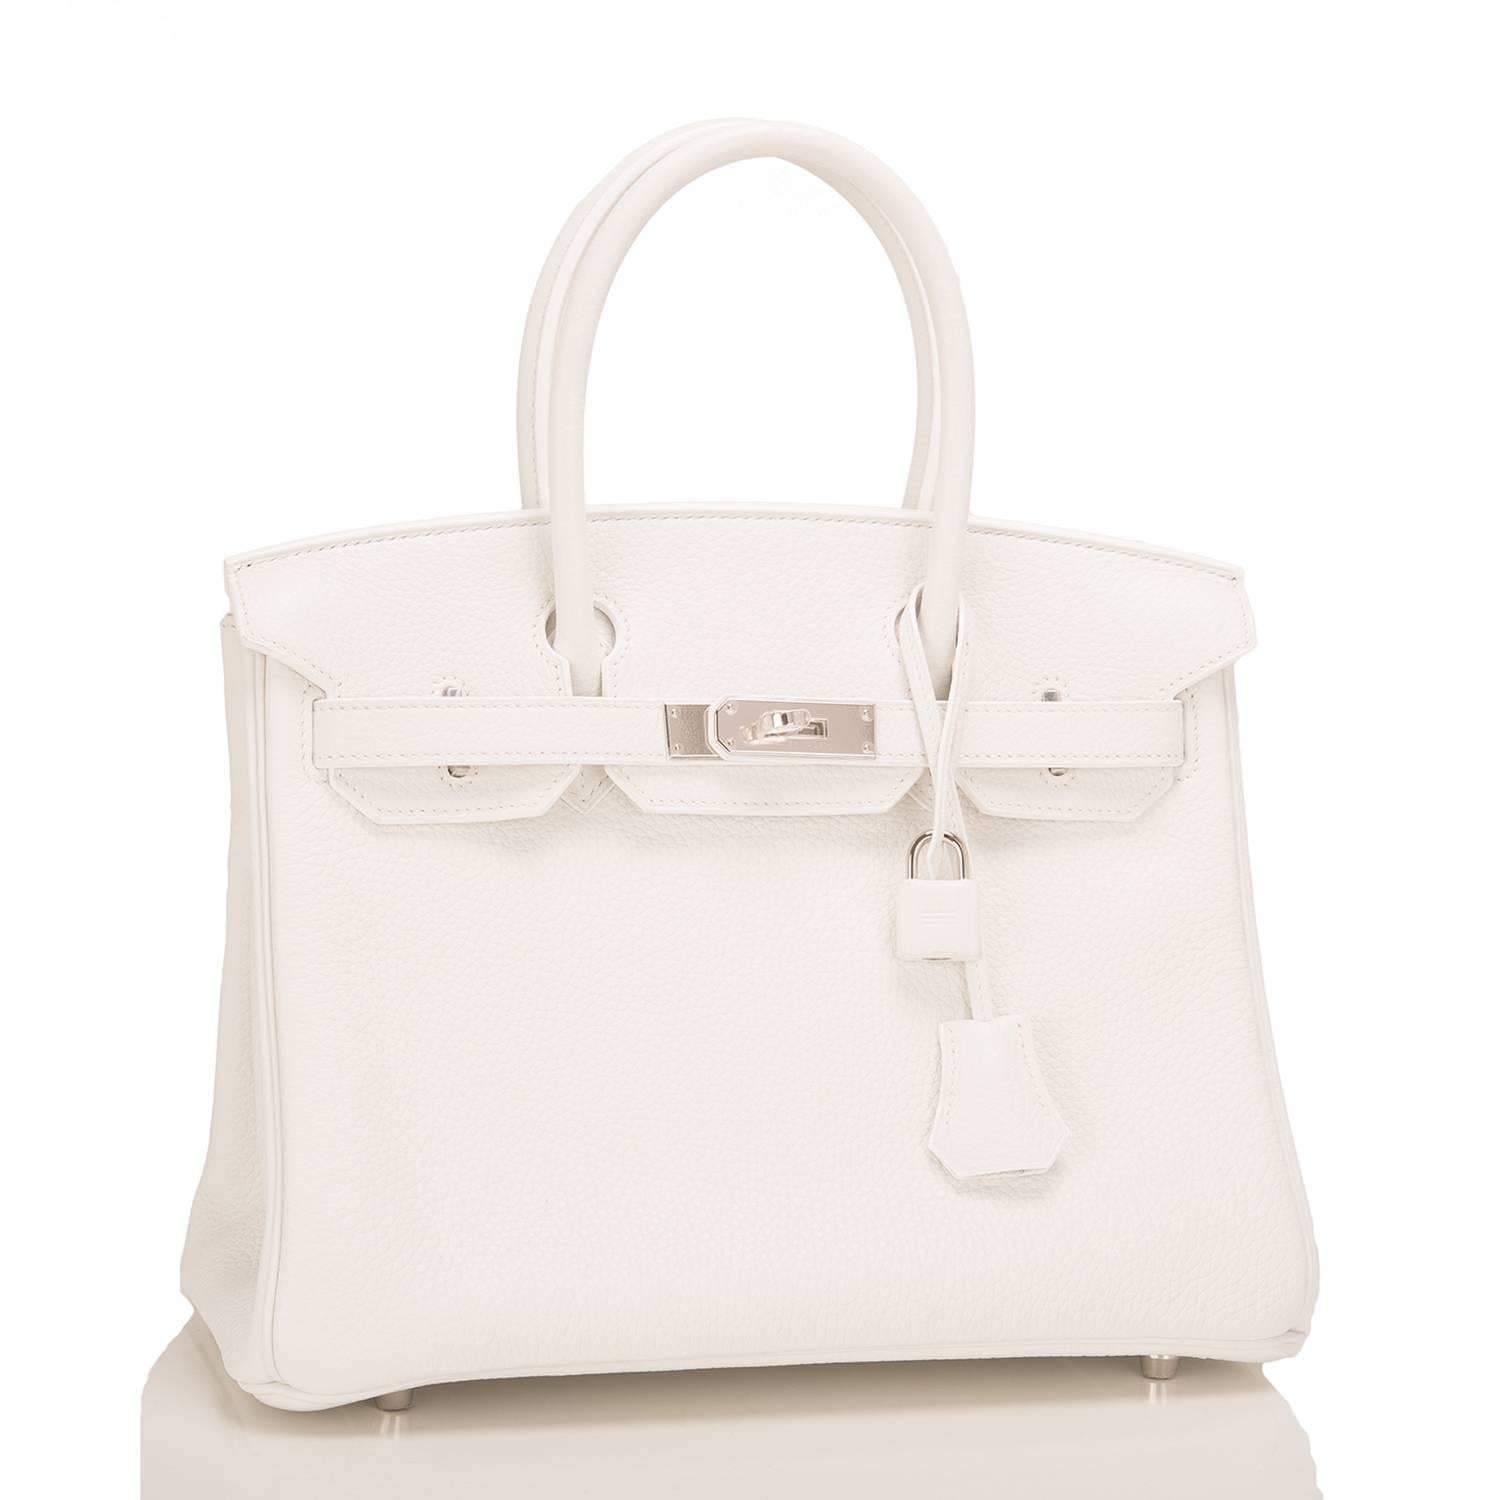 Hermes white Birkin 30cm of clemence leather with palladium hardware.

This Birkin has tonal stitching, a front toggle closure, a clochette with lock and two keys, and double rolled handles.

The interior is lined with white chevre and has a zip